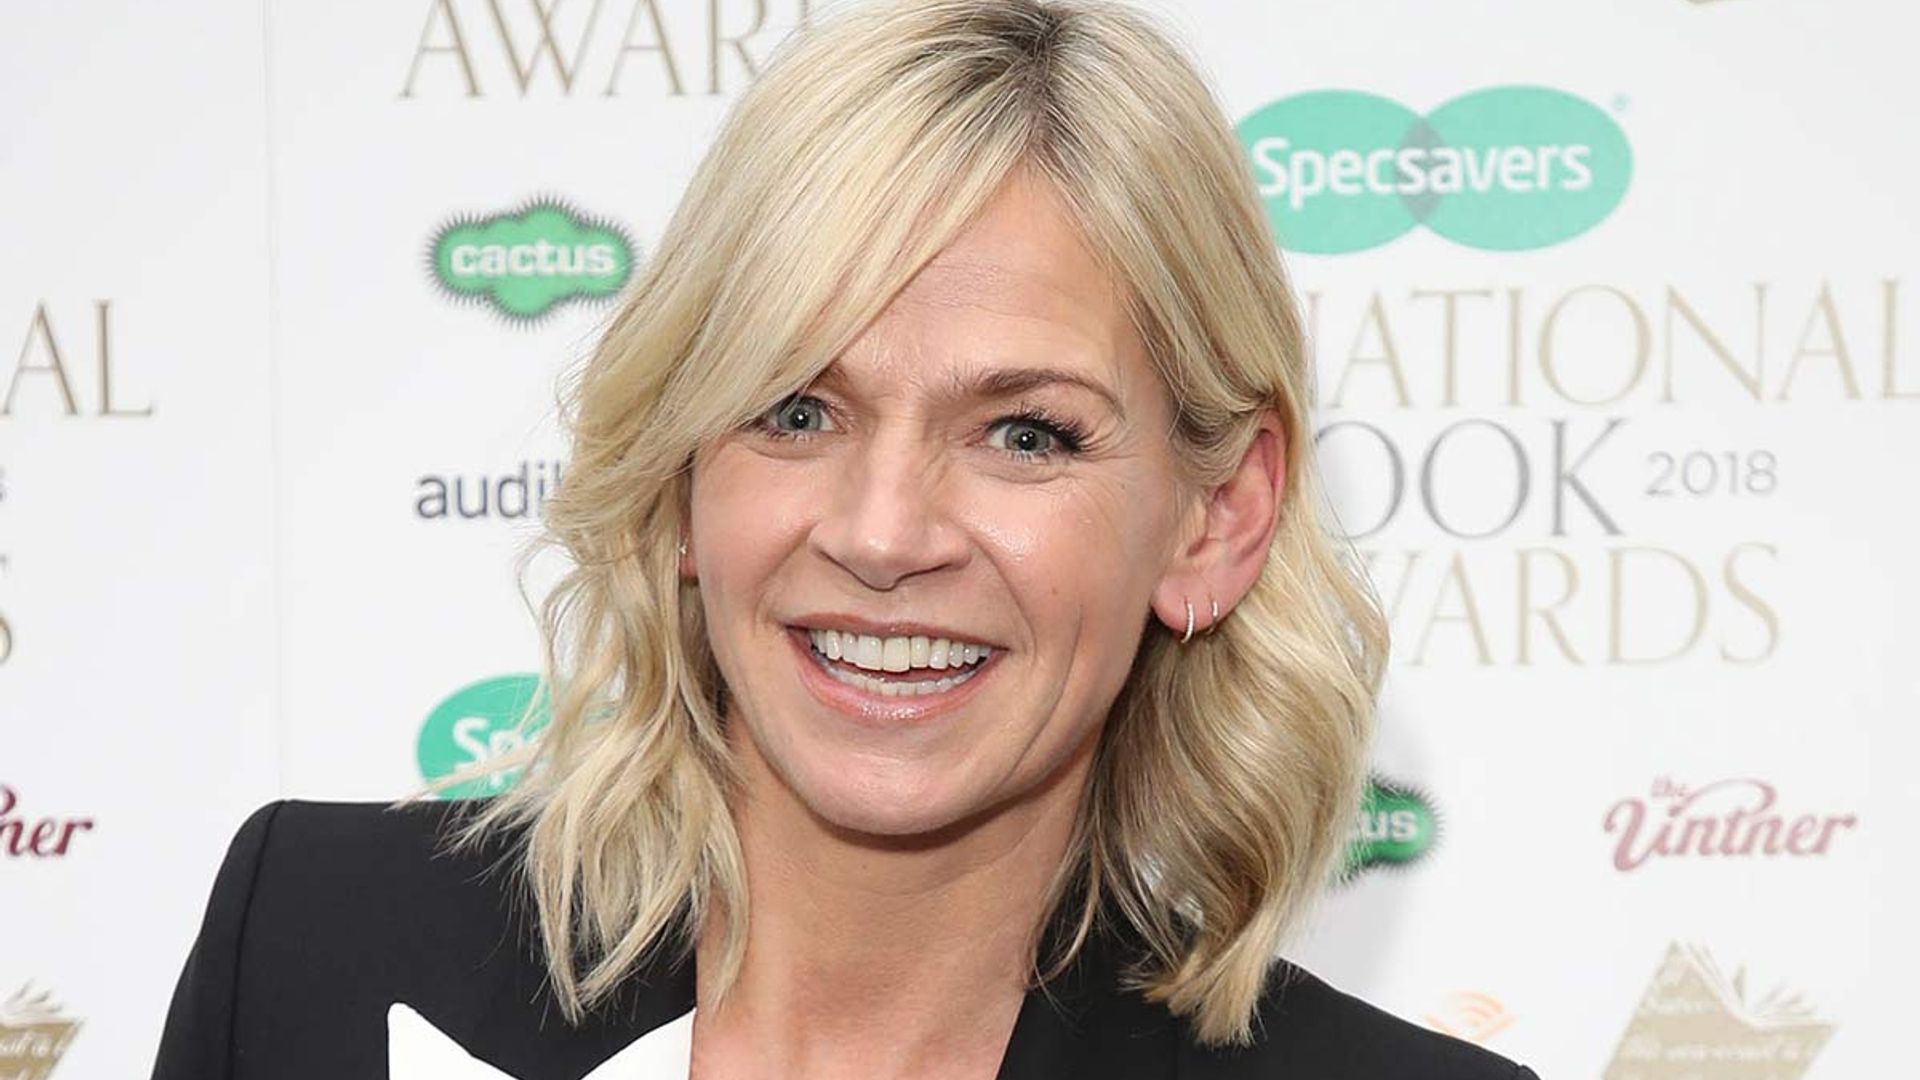 Zoe Ball wows with gorgeous hair makeover after shock Strictly exit